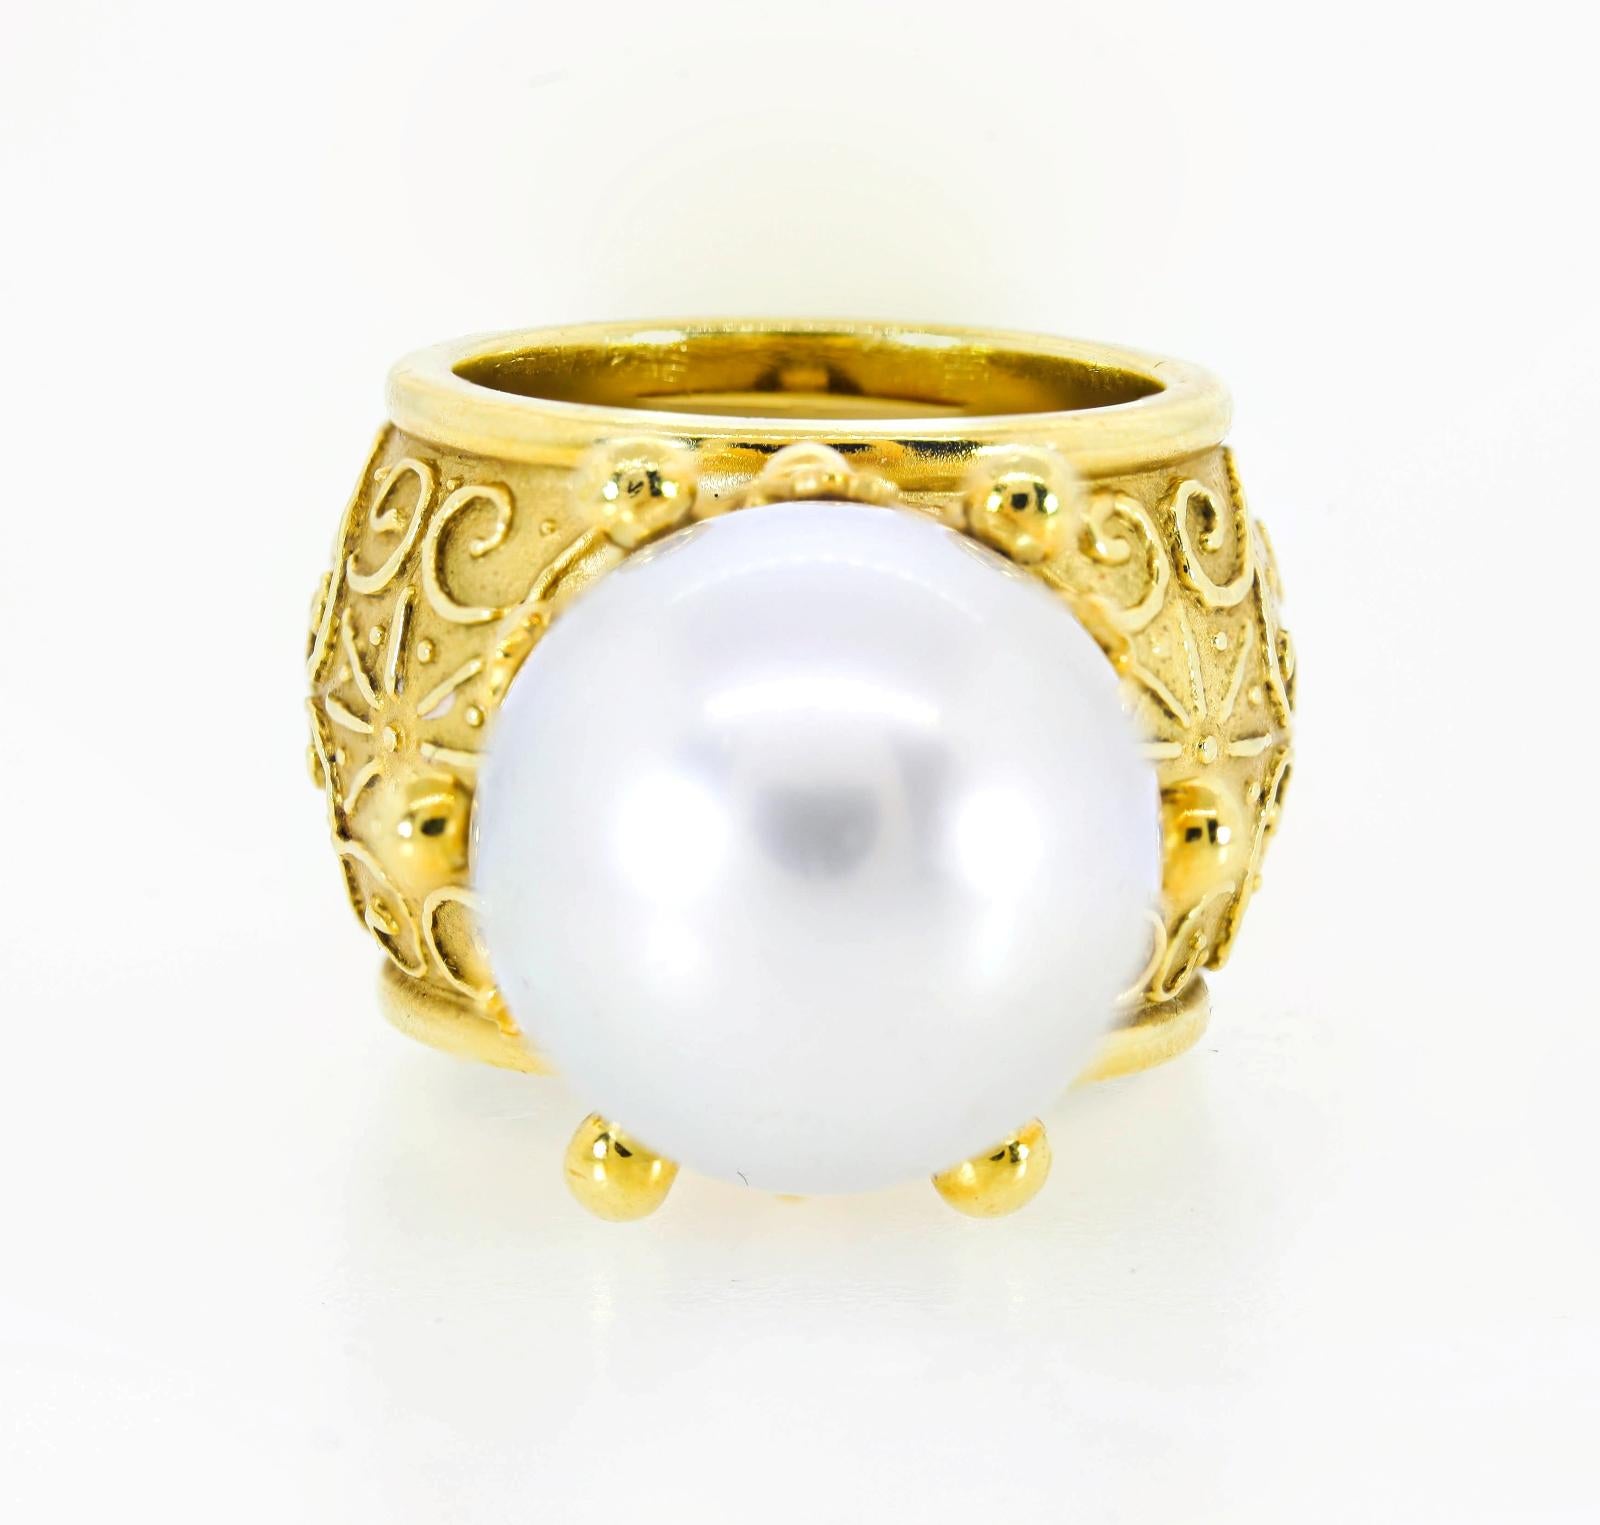 From Los Angeles designer Cynthia Bach this distinctive 18KT yellow gold ring.   It features a lustrous 14.65 mm South Sea Pearl nestled in her iconic detailed crown design.  The setting is stunningly adorned with raised scroll work and engraving. 